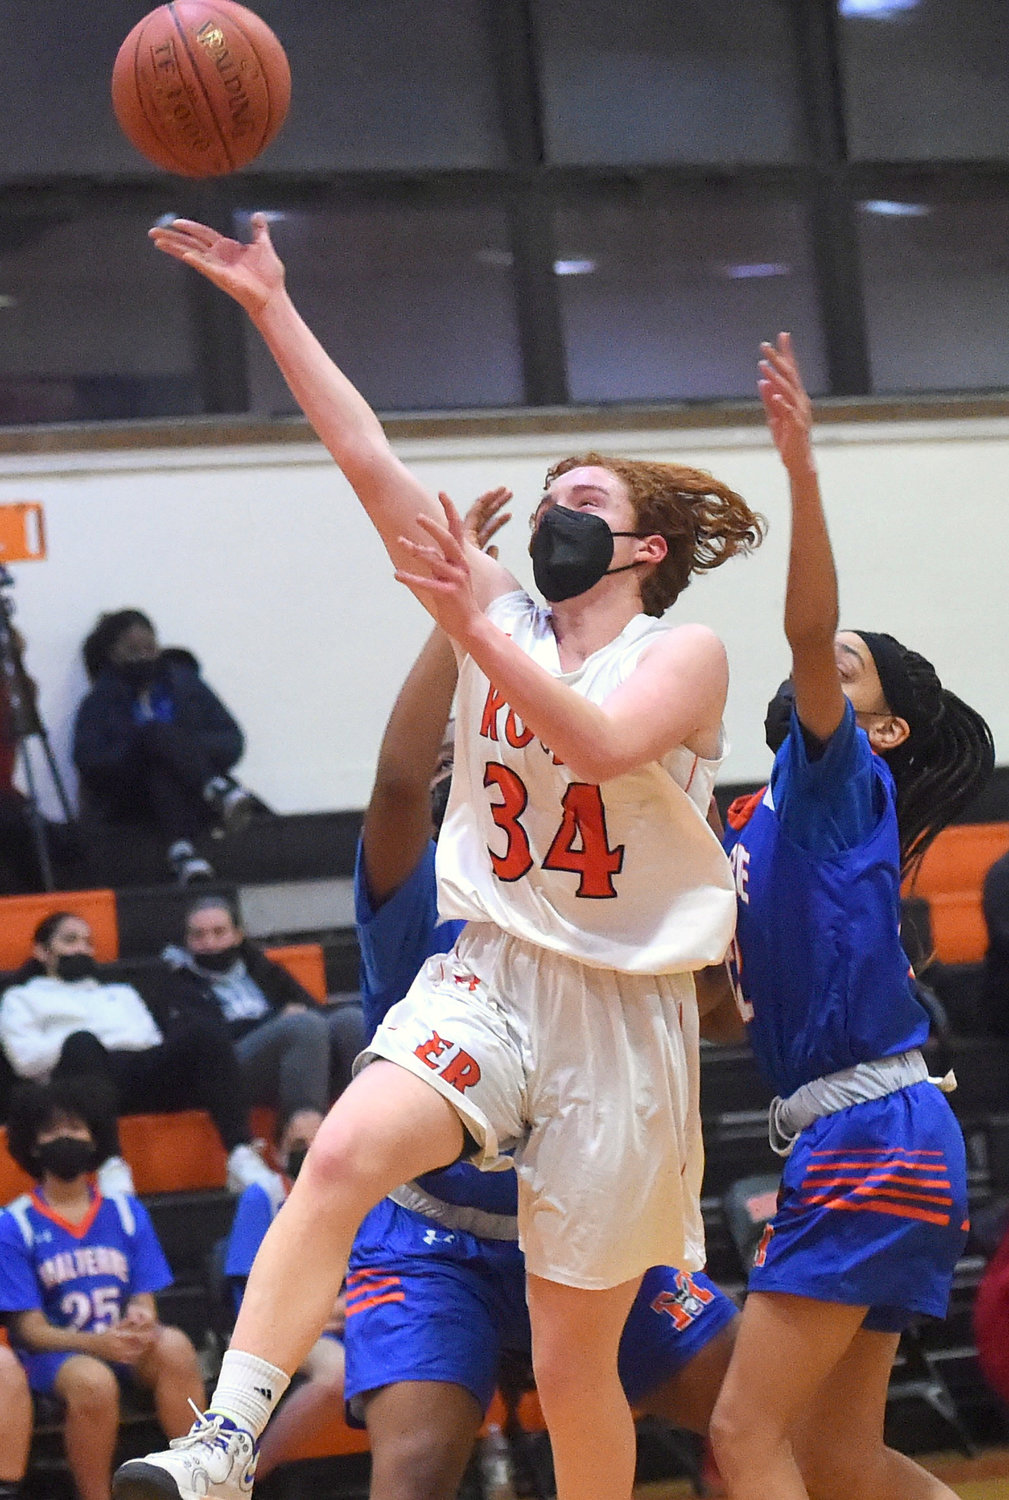 Eighth-grader Maya Motherway (14 points) helped East Rockaway knock off Malverne in a Conference B matchup on Jan. 4.